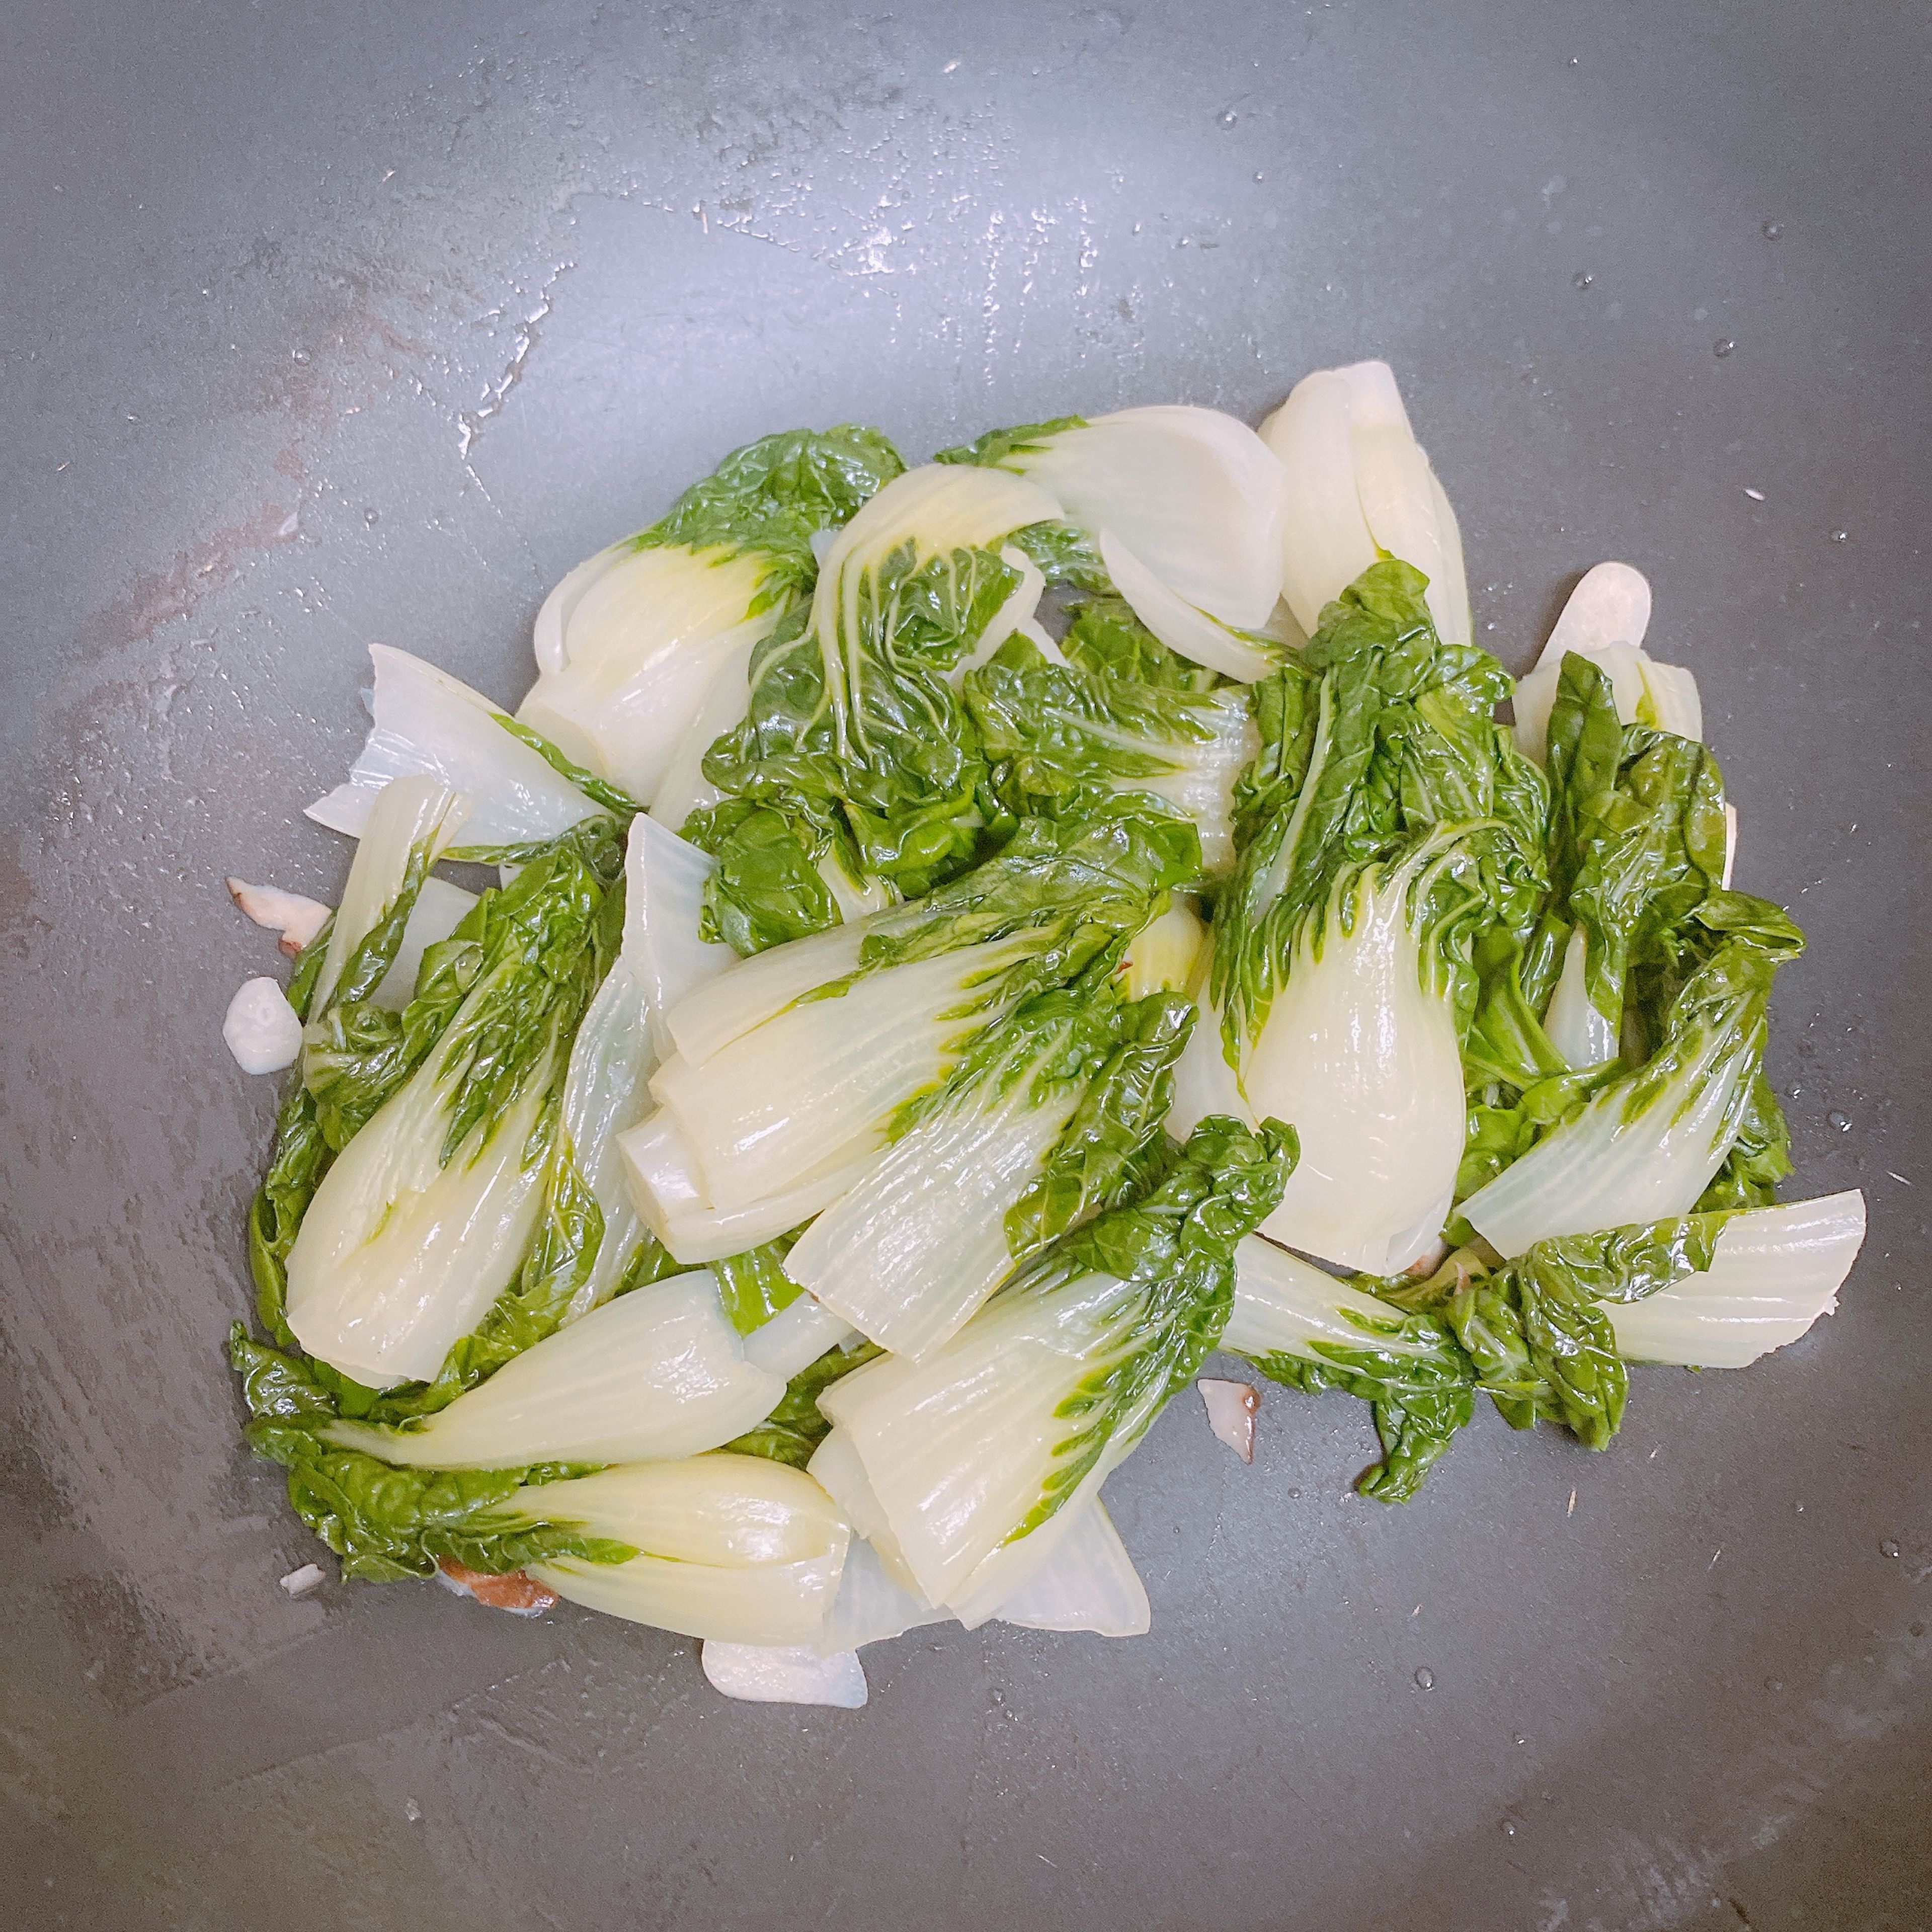 Add half of the oil and turn on the stove. When the oil is heated, add half of the garlic (garlic mix if you have mushroom chips), fry for a few seconds until you can smell the garlic, and add the baby bok choy. Fry for a minute, turn off the stove if you want, and scoop them all out to the plate/big bowl in which you want to serve the dish.